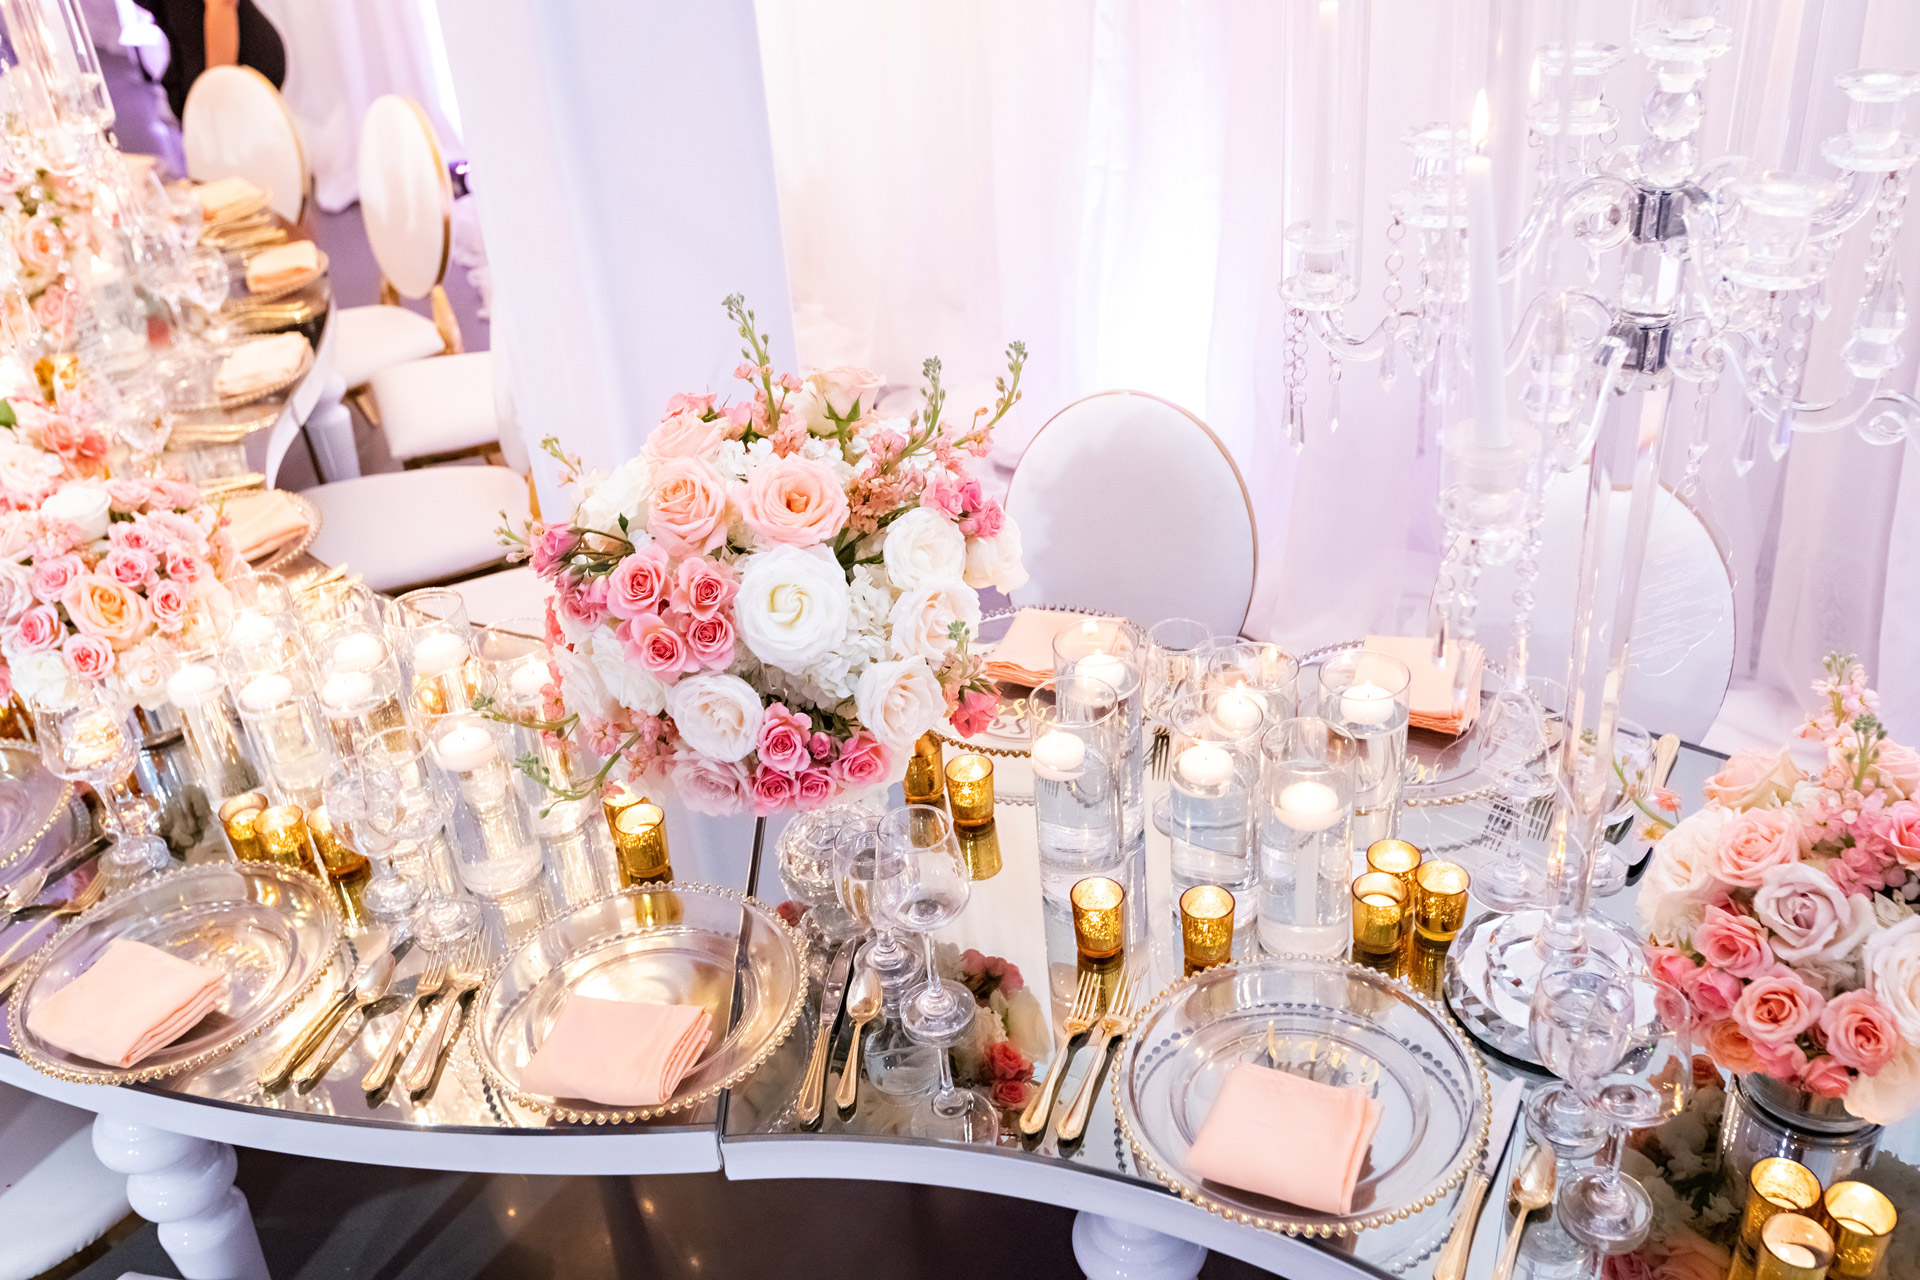 Table decorated with pink flowers and candles.